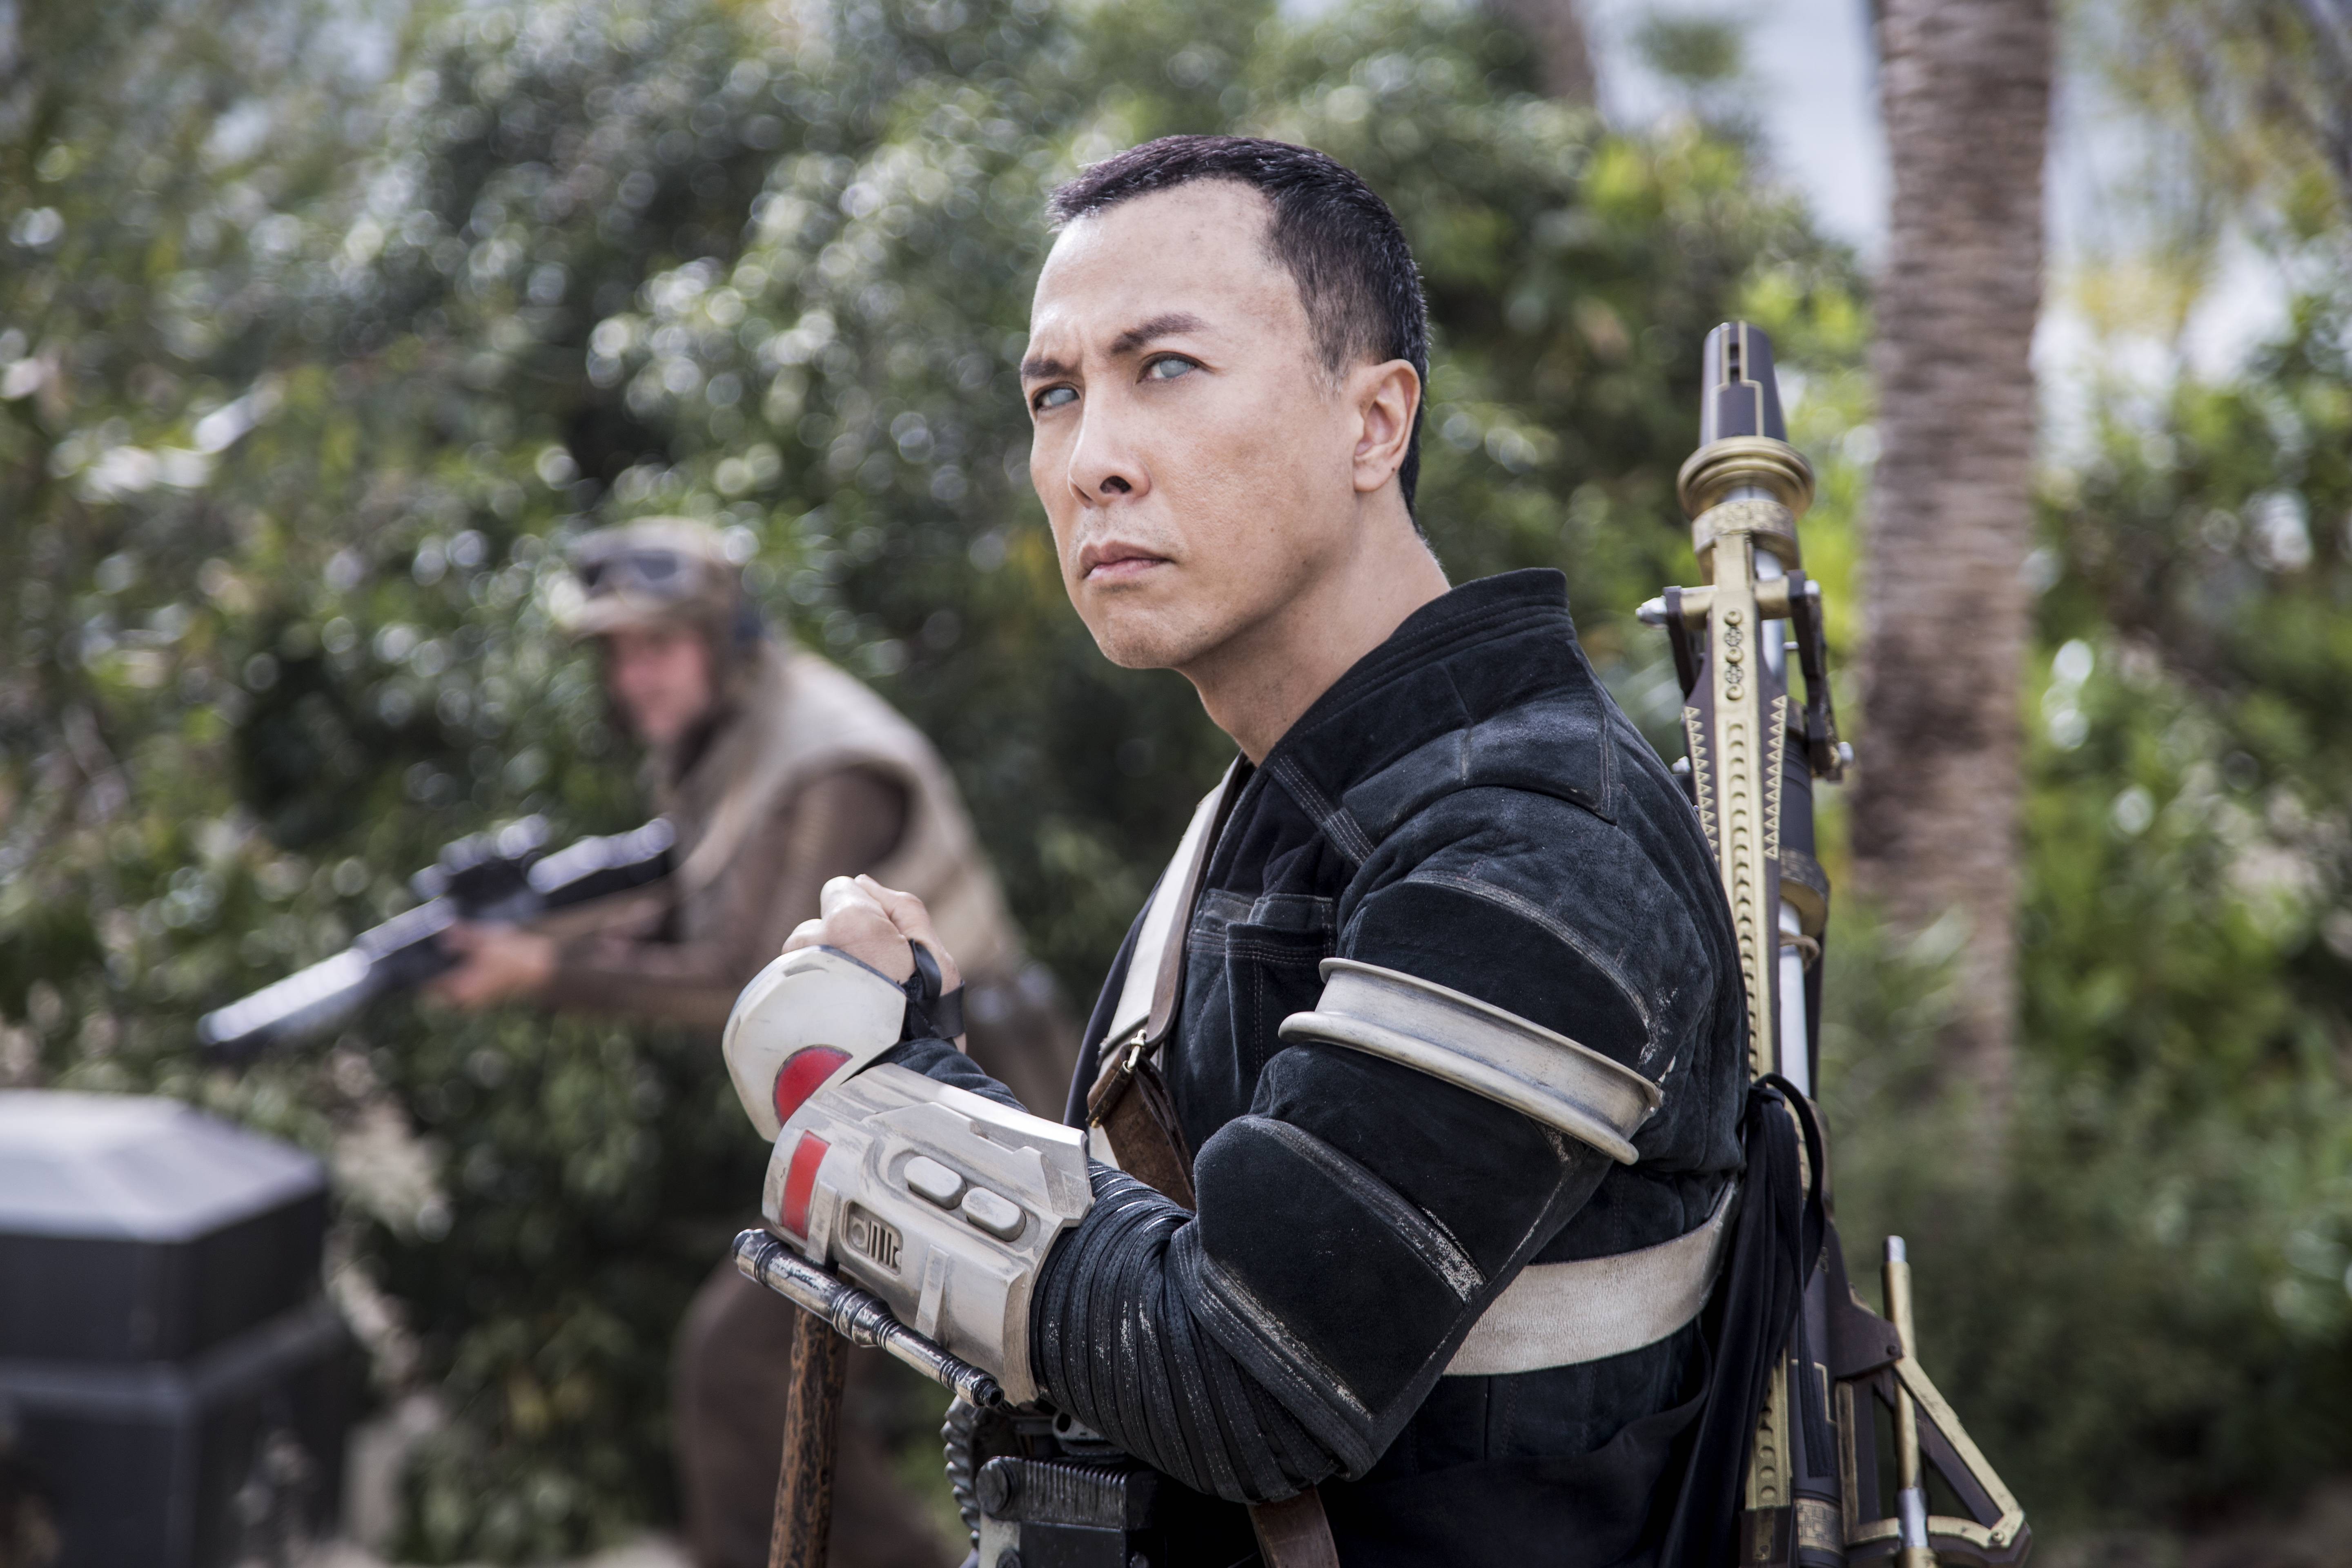 General 5760x3840 Star Wars Rogue One: A Star Wars Story Donnie Yen science fiction